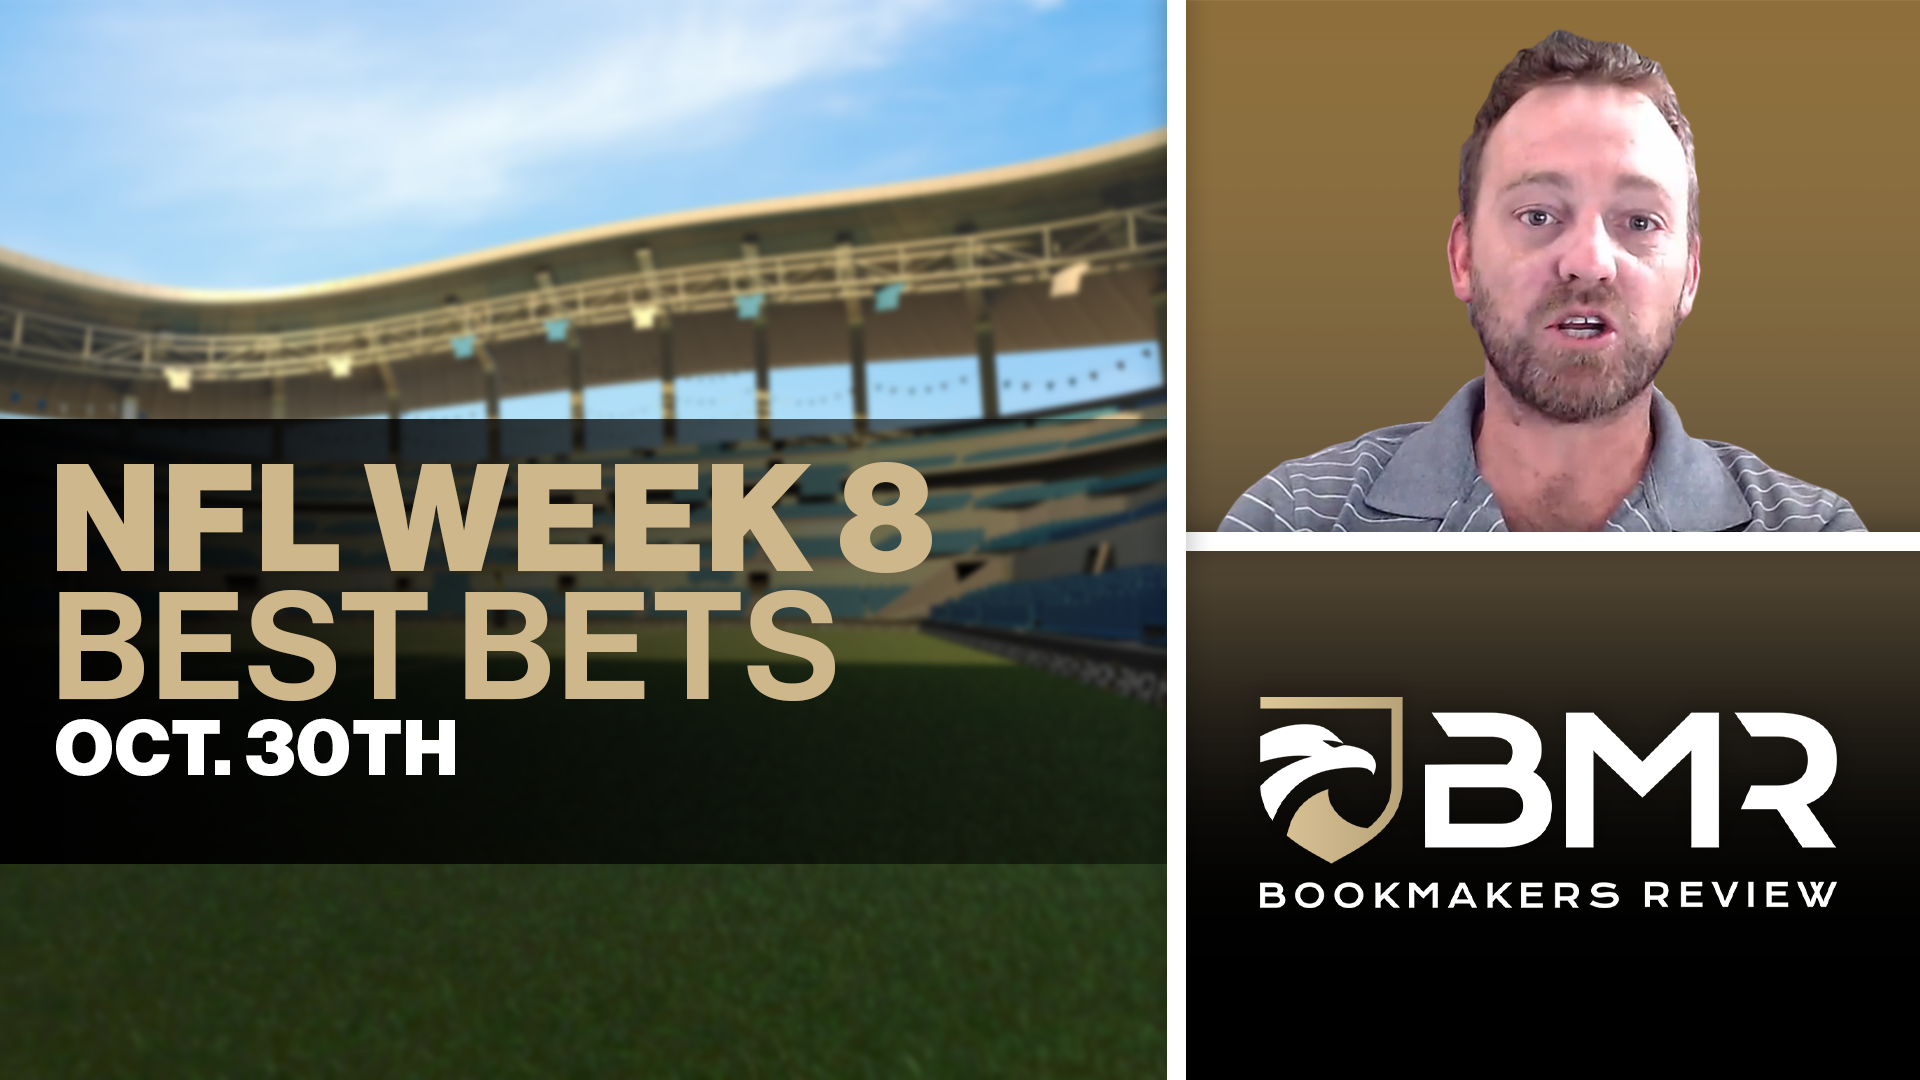 NFL Best Bets &#8211; Picks for Week 8 by Kyle Purviance (Oct. 30th)